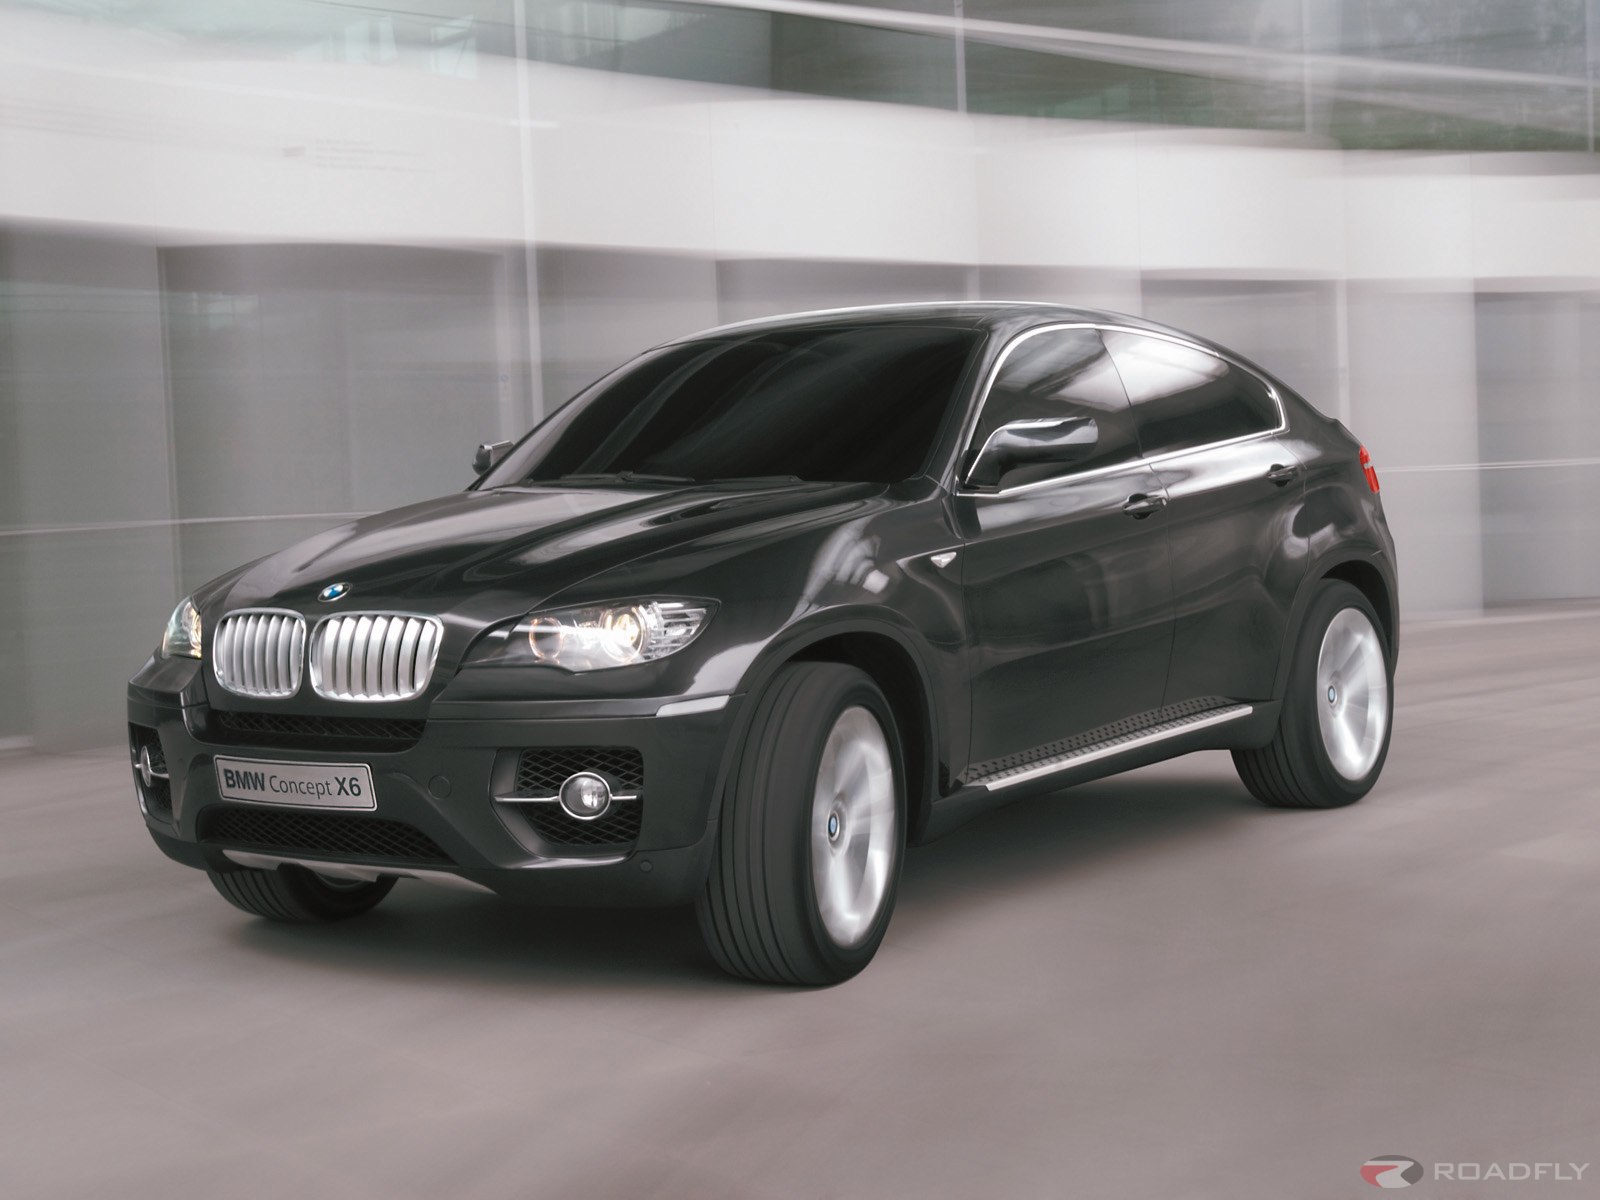 cars photos & wallpapers: bmw x6 photos and wallpapers